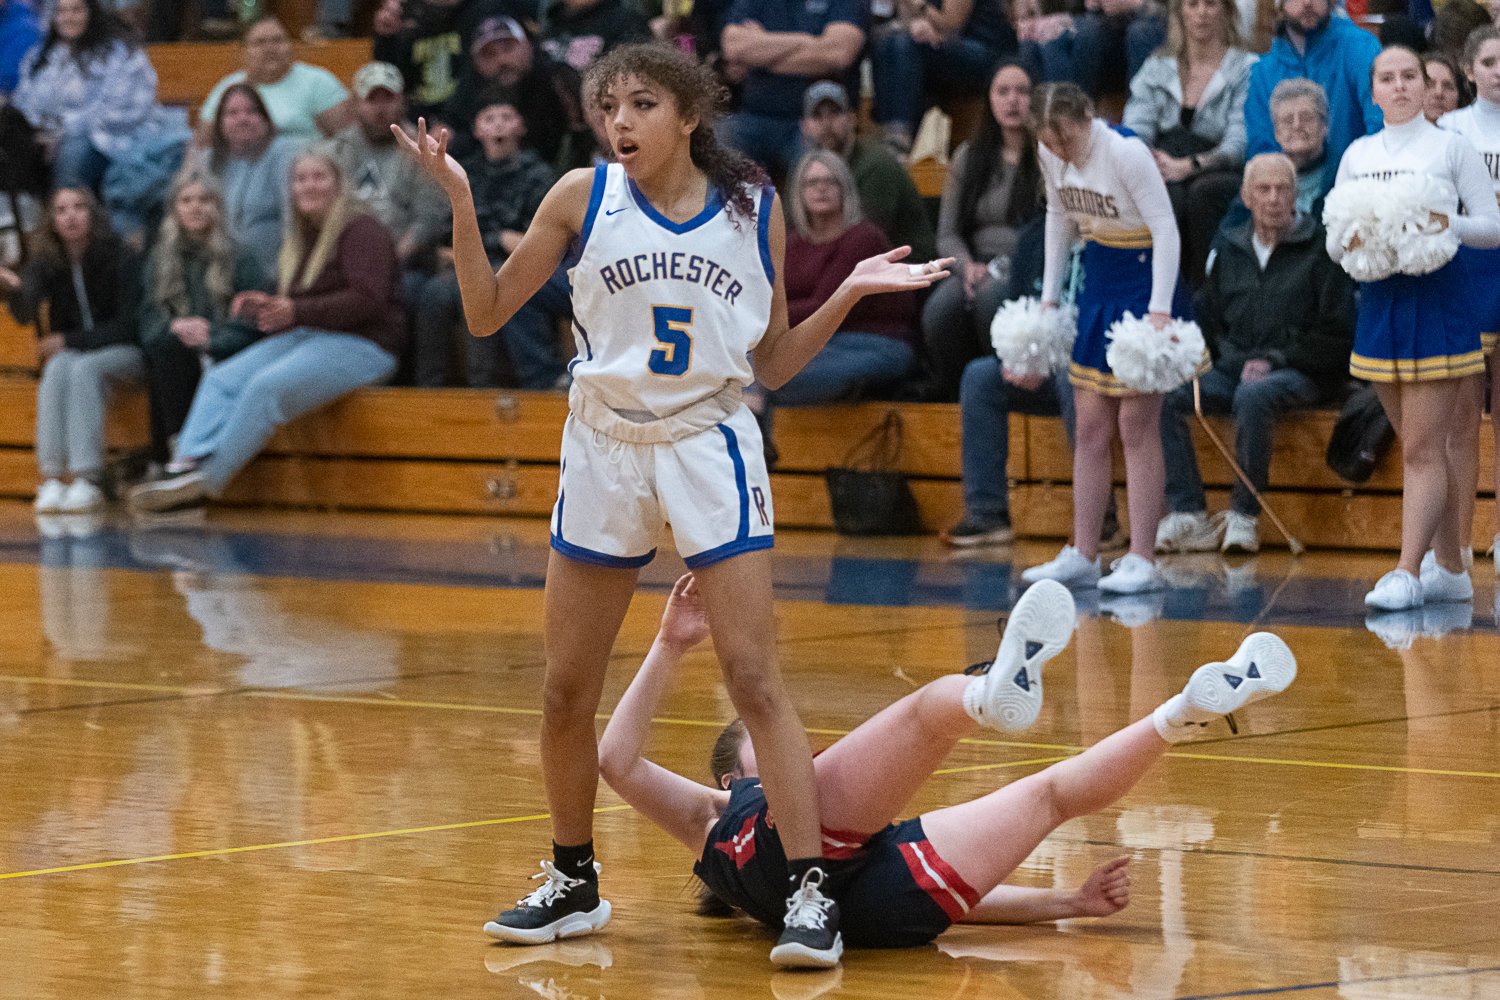 Rochester's Mercedies Dupont pleads her case after fouling Black Hills' Kiley McMahon during the fourth quarter of the Warriors' win over the Wolves on Feb. 3.